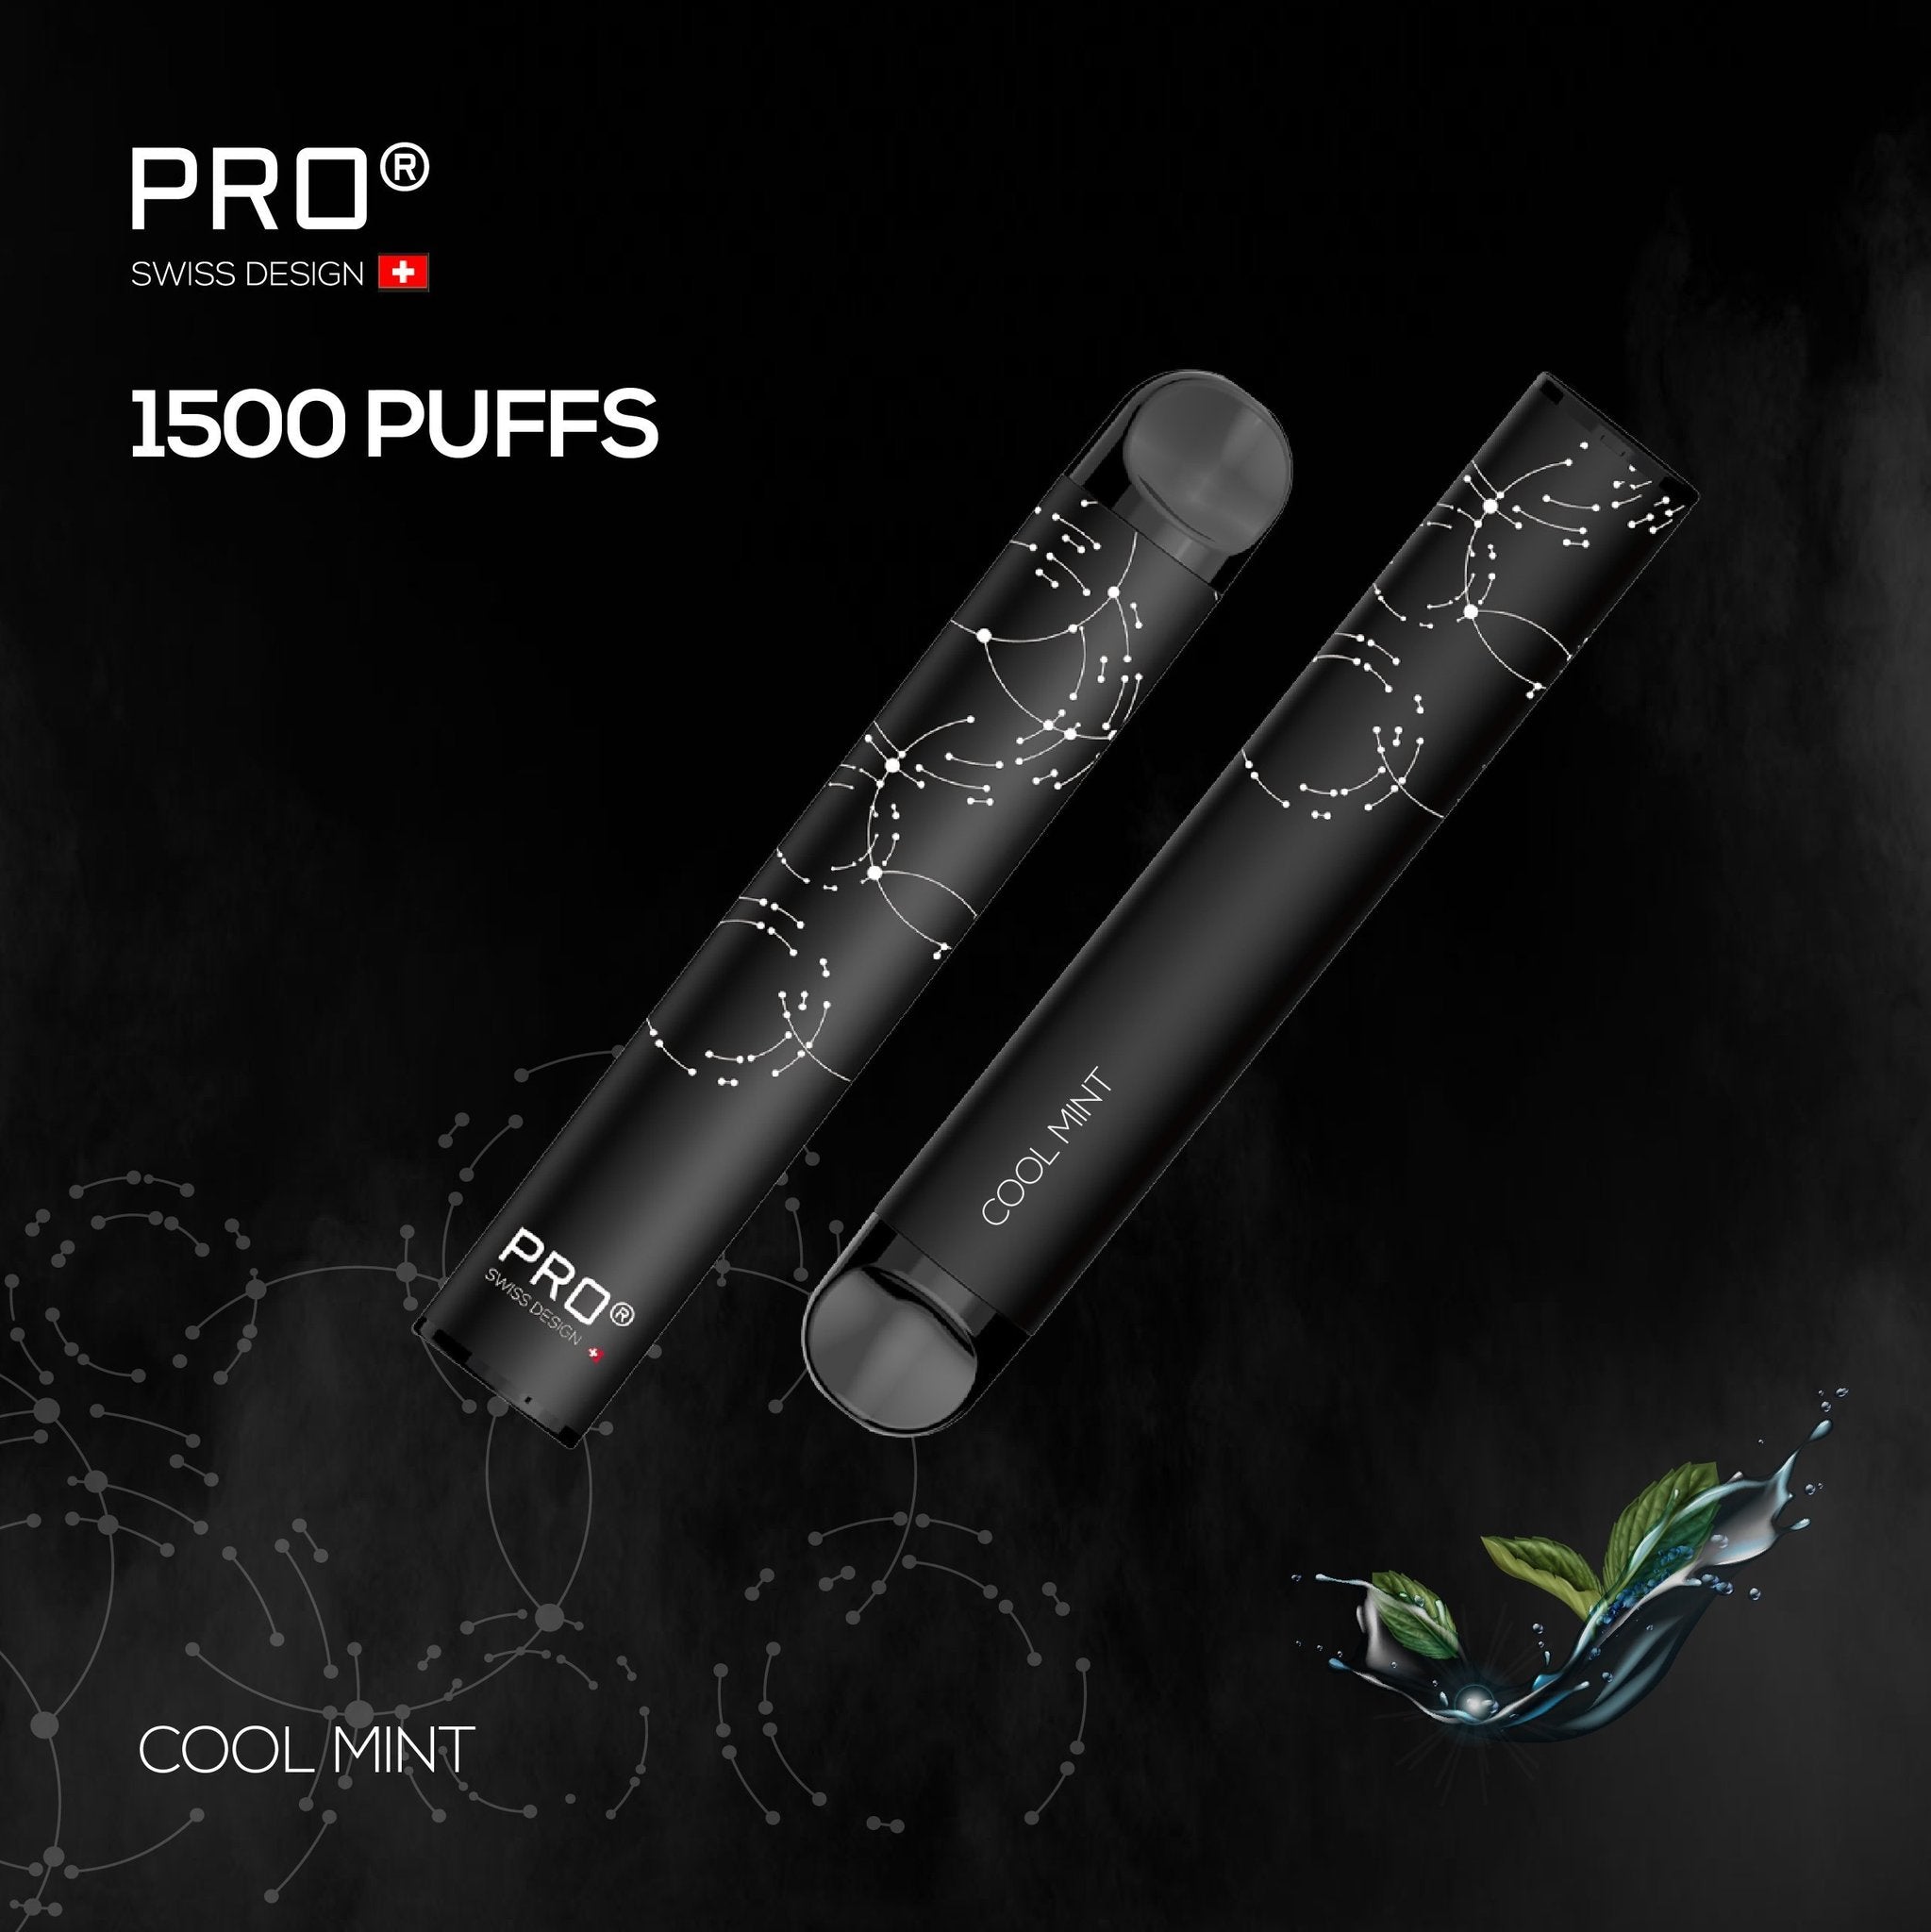 SWISS PRO Disposable Pod System - 1500 Puffs - 20 mg